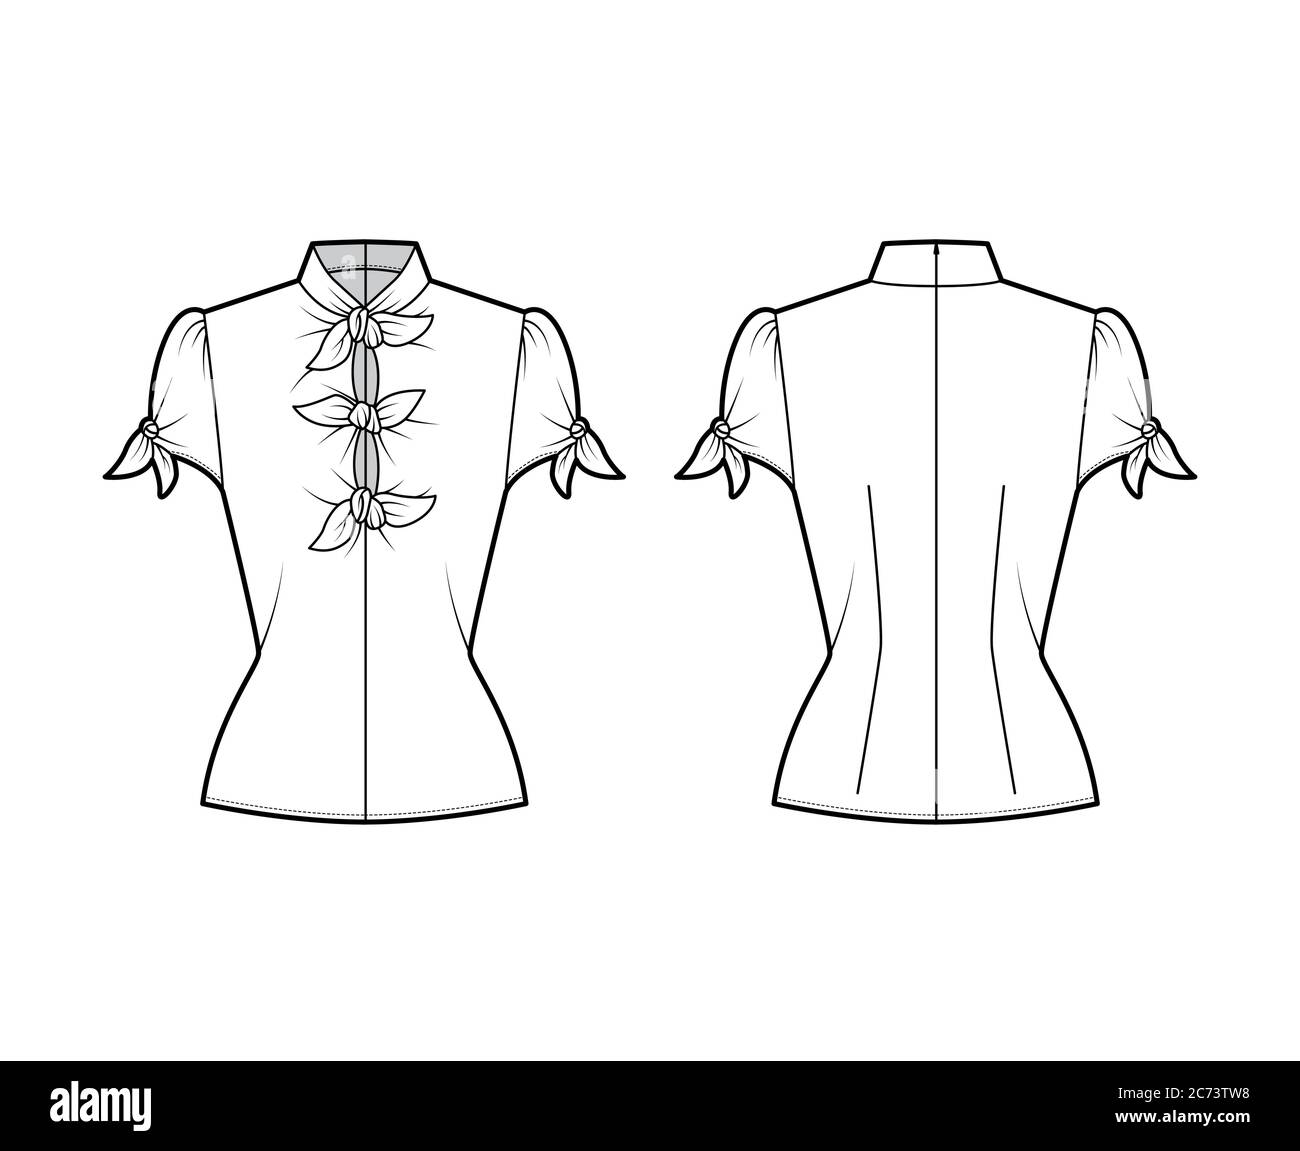 Knotted cutout blouse technical fashion illustration with high neckline, puffed volume sleeves, back zip fastening. Flat apparel template front, back white color. Women men unisex garment CAD mockup Stock Vector